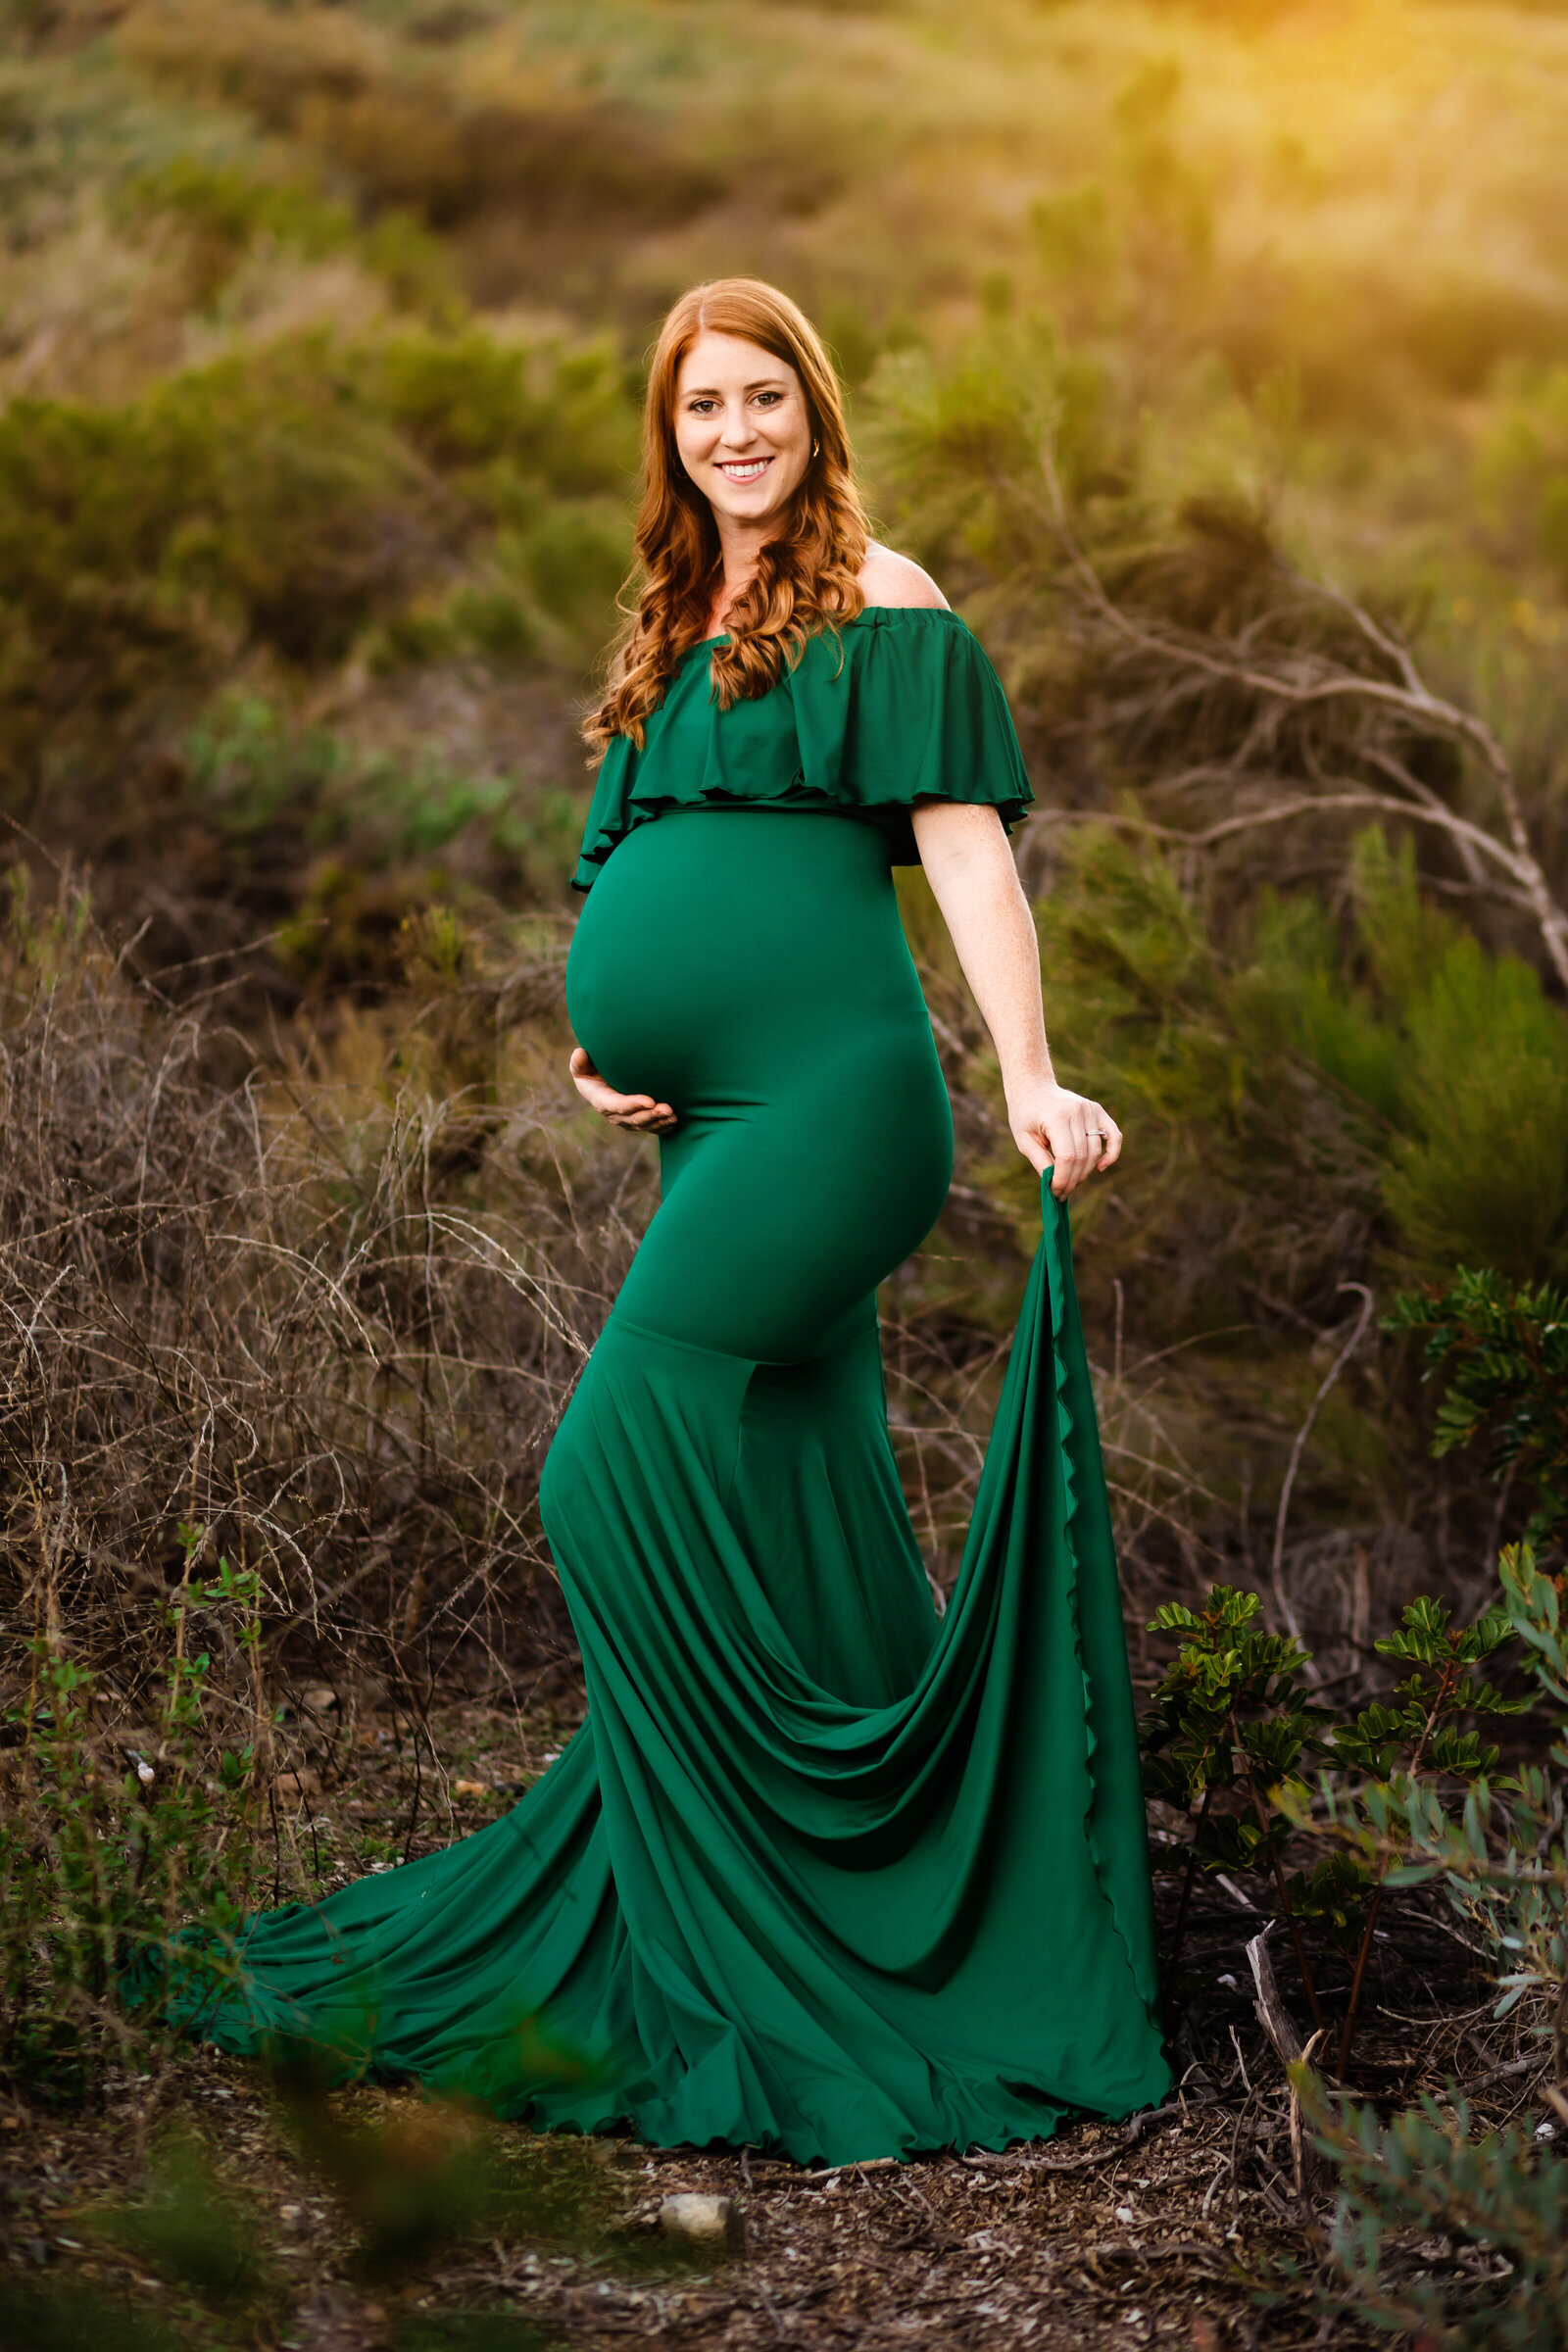 Maternity Photographer, a pregnant woman stands smiling in her gown in the wild